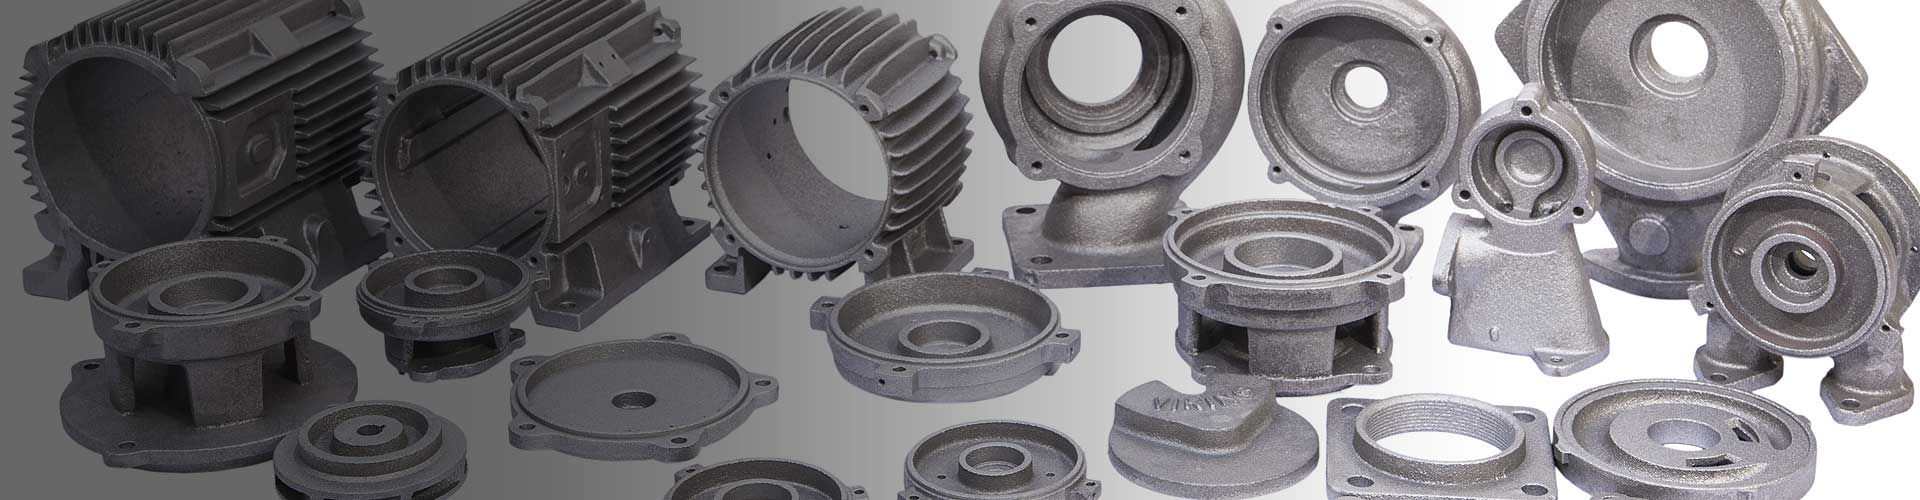 General Engineering Casting, Shell Molding Casting and Sand Casting Supplier in Rajkot, Gujarat, India, We are one of the flexible foundries in this region.